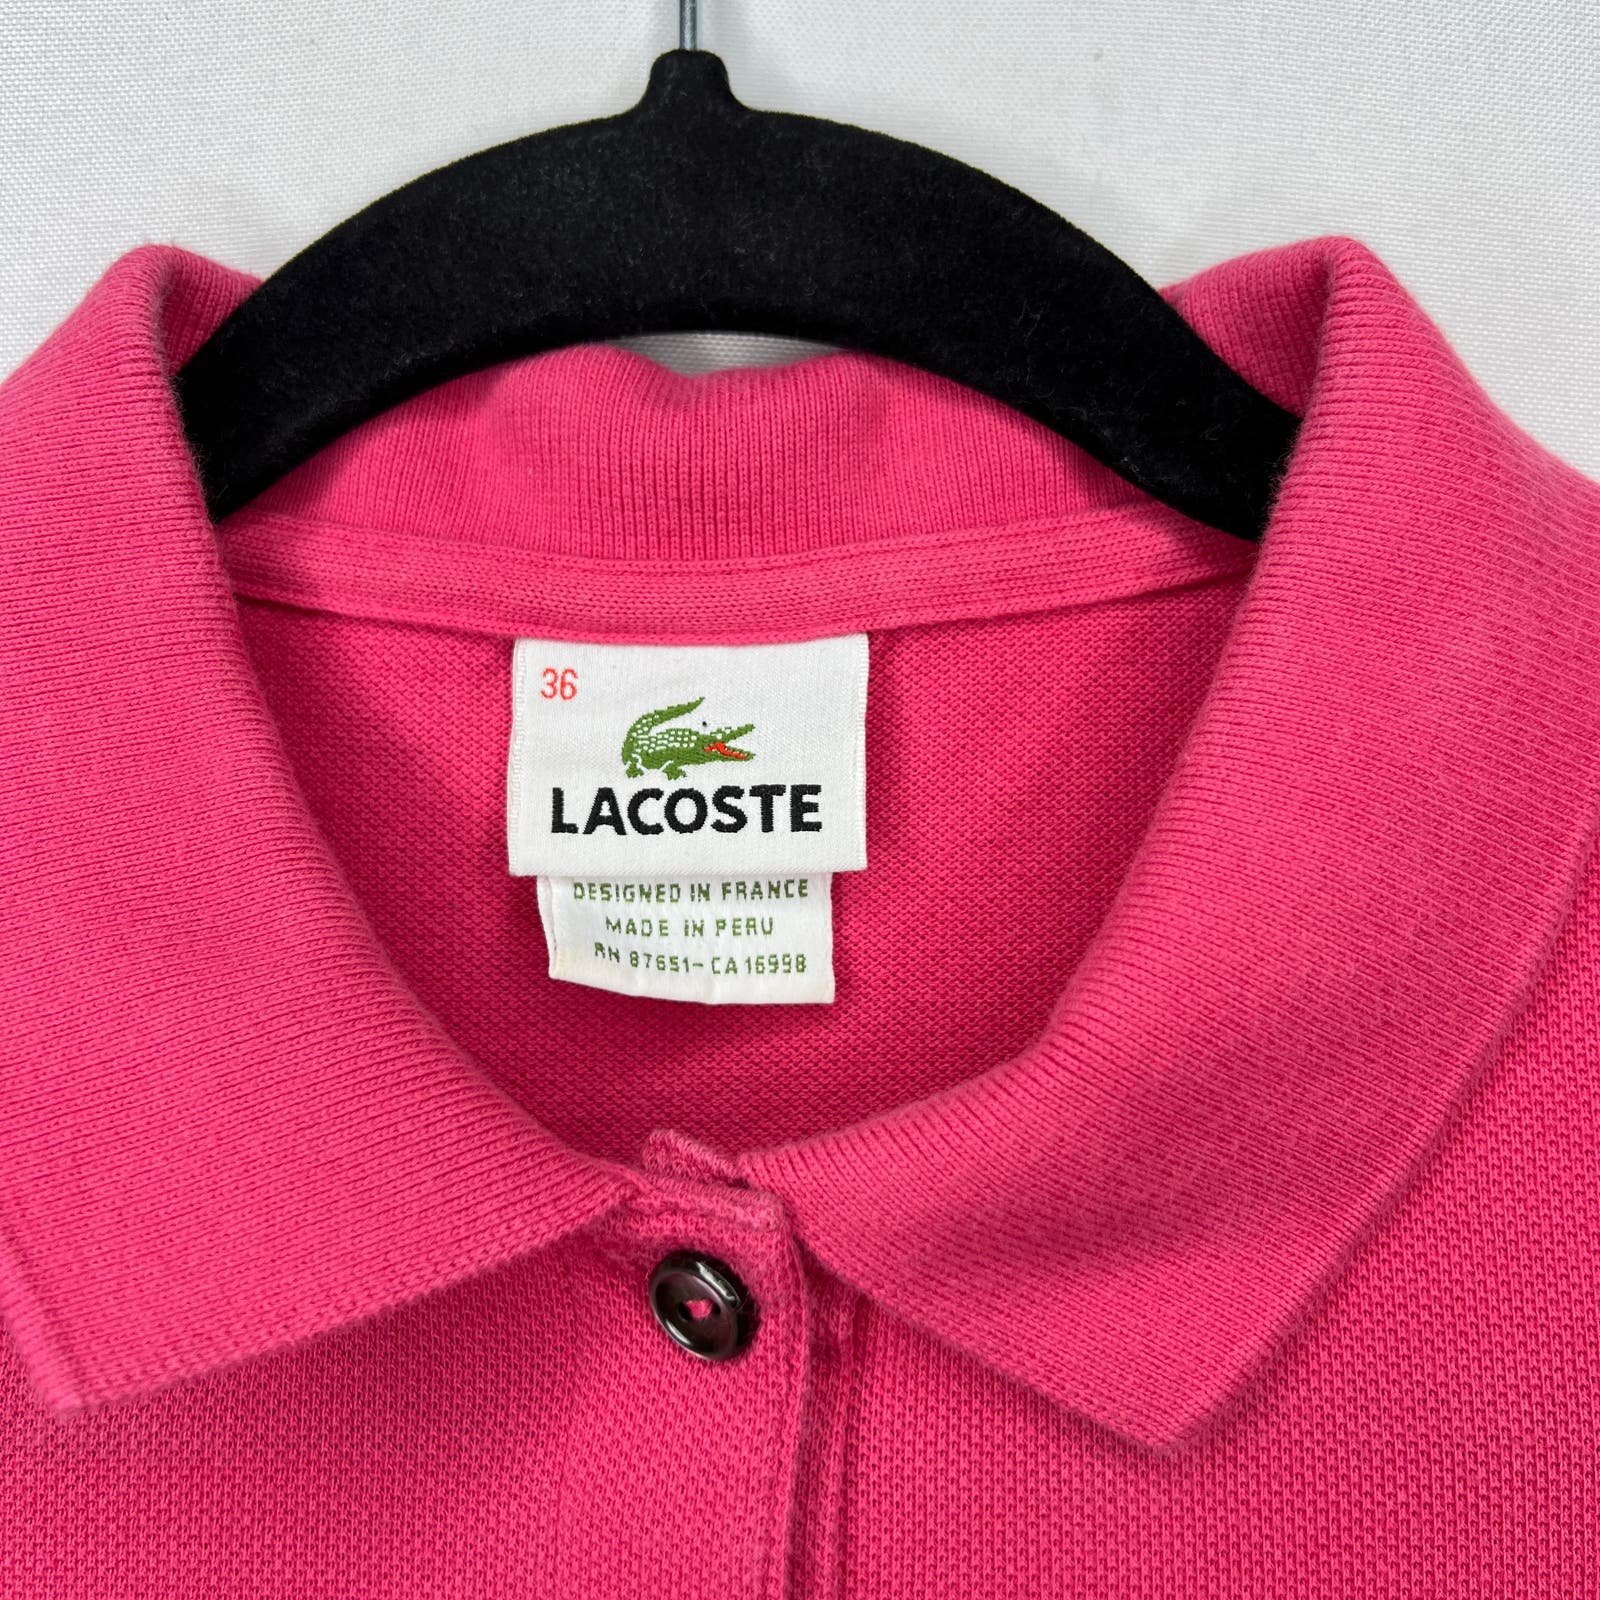 cheapest place to buy  LACOSTE Women´s Short Sleeve Polo Shirt Top 36 Small Pink pECwDoWiI best sale